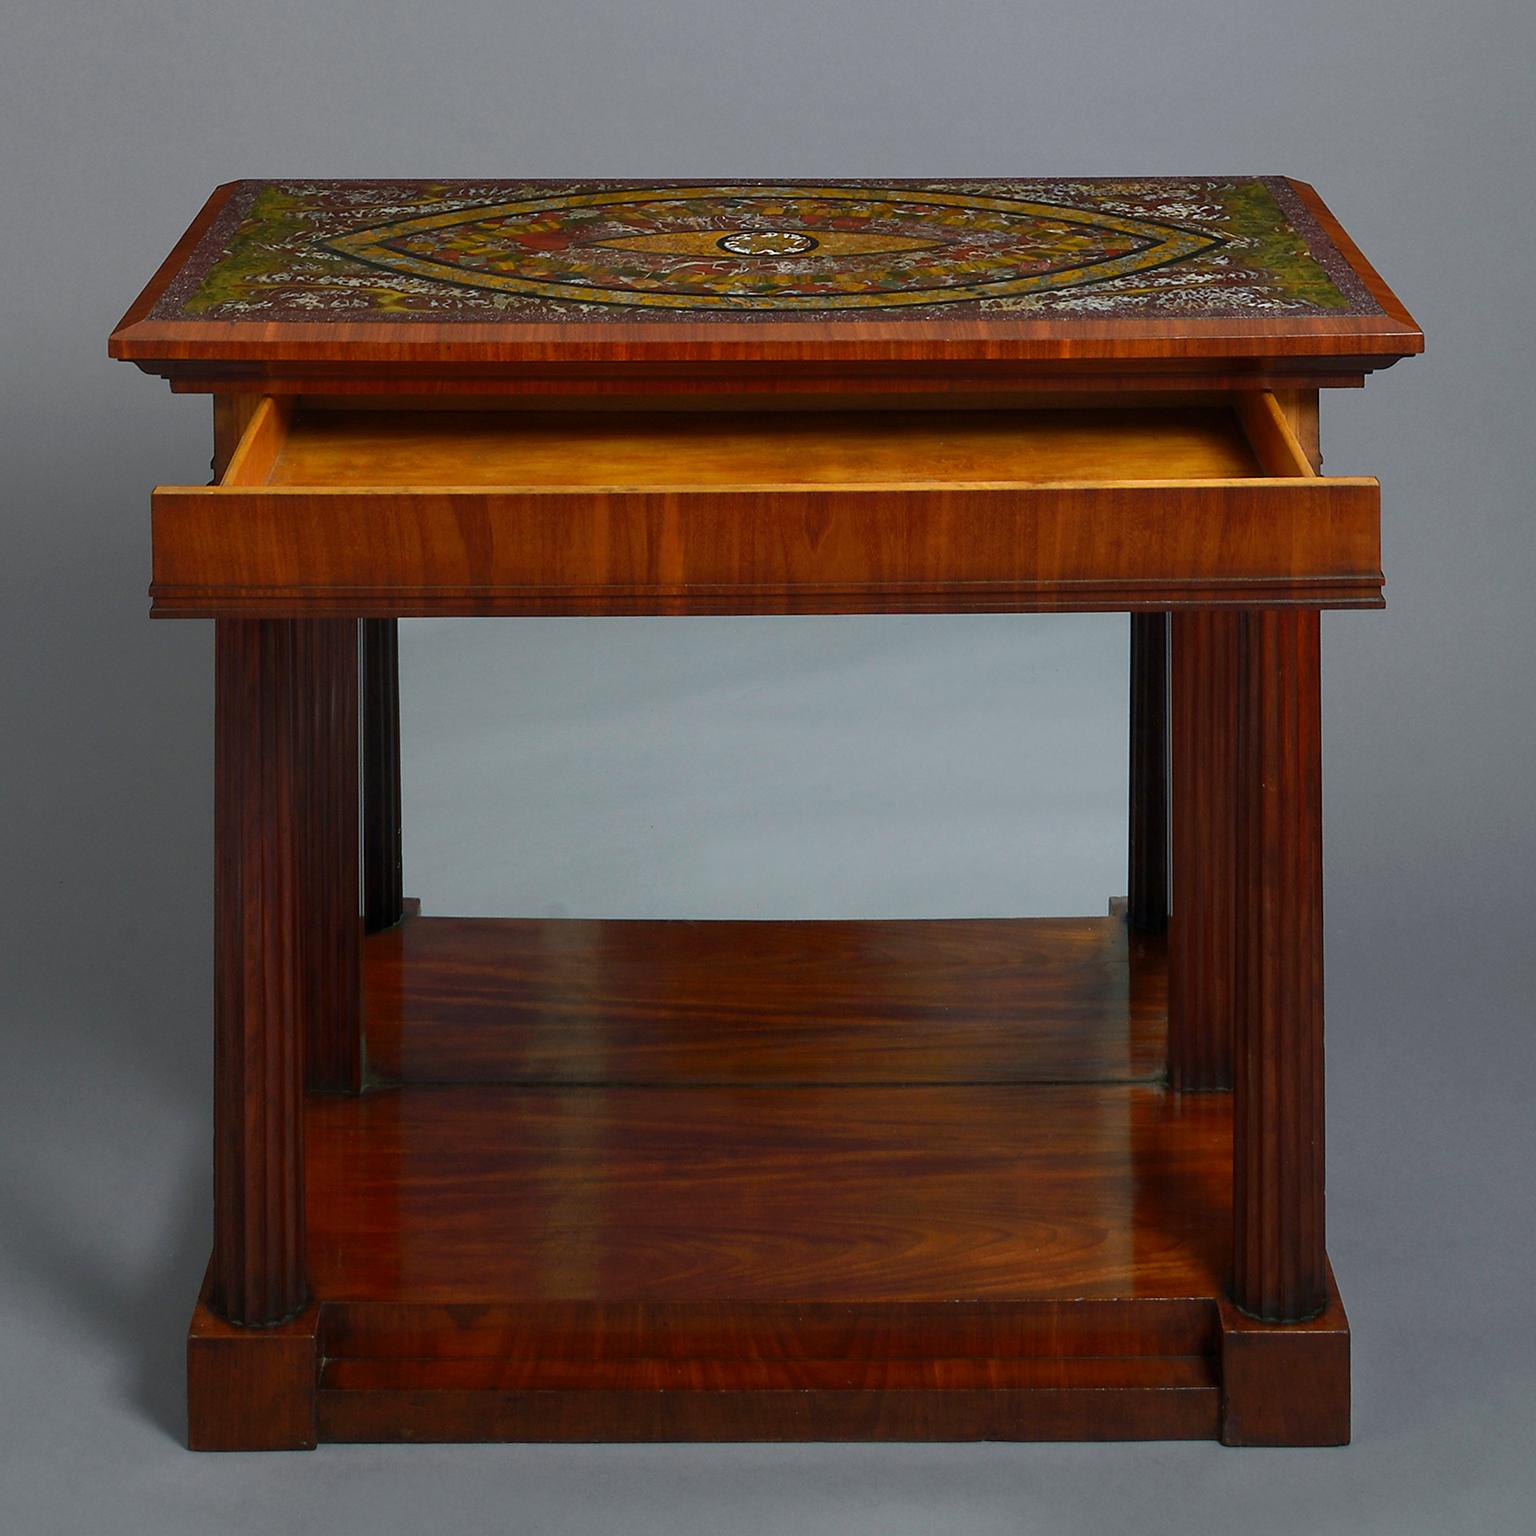 A 19th century Roman Pietra Dura topped mahogany console table in the manner of Francesco Sibilio the rectangular top with navette shaped design, perhaps representing the Occhio della Prividenza or ‘All-Seeing Eye’, the pupil formed of a star, the